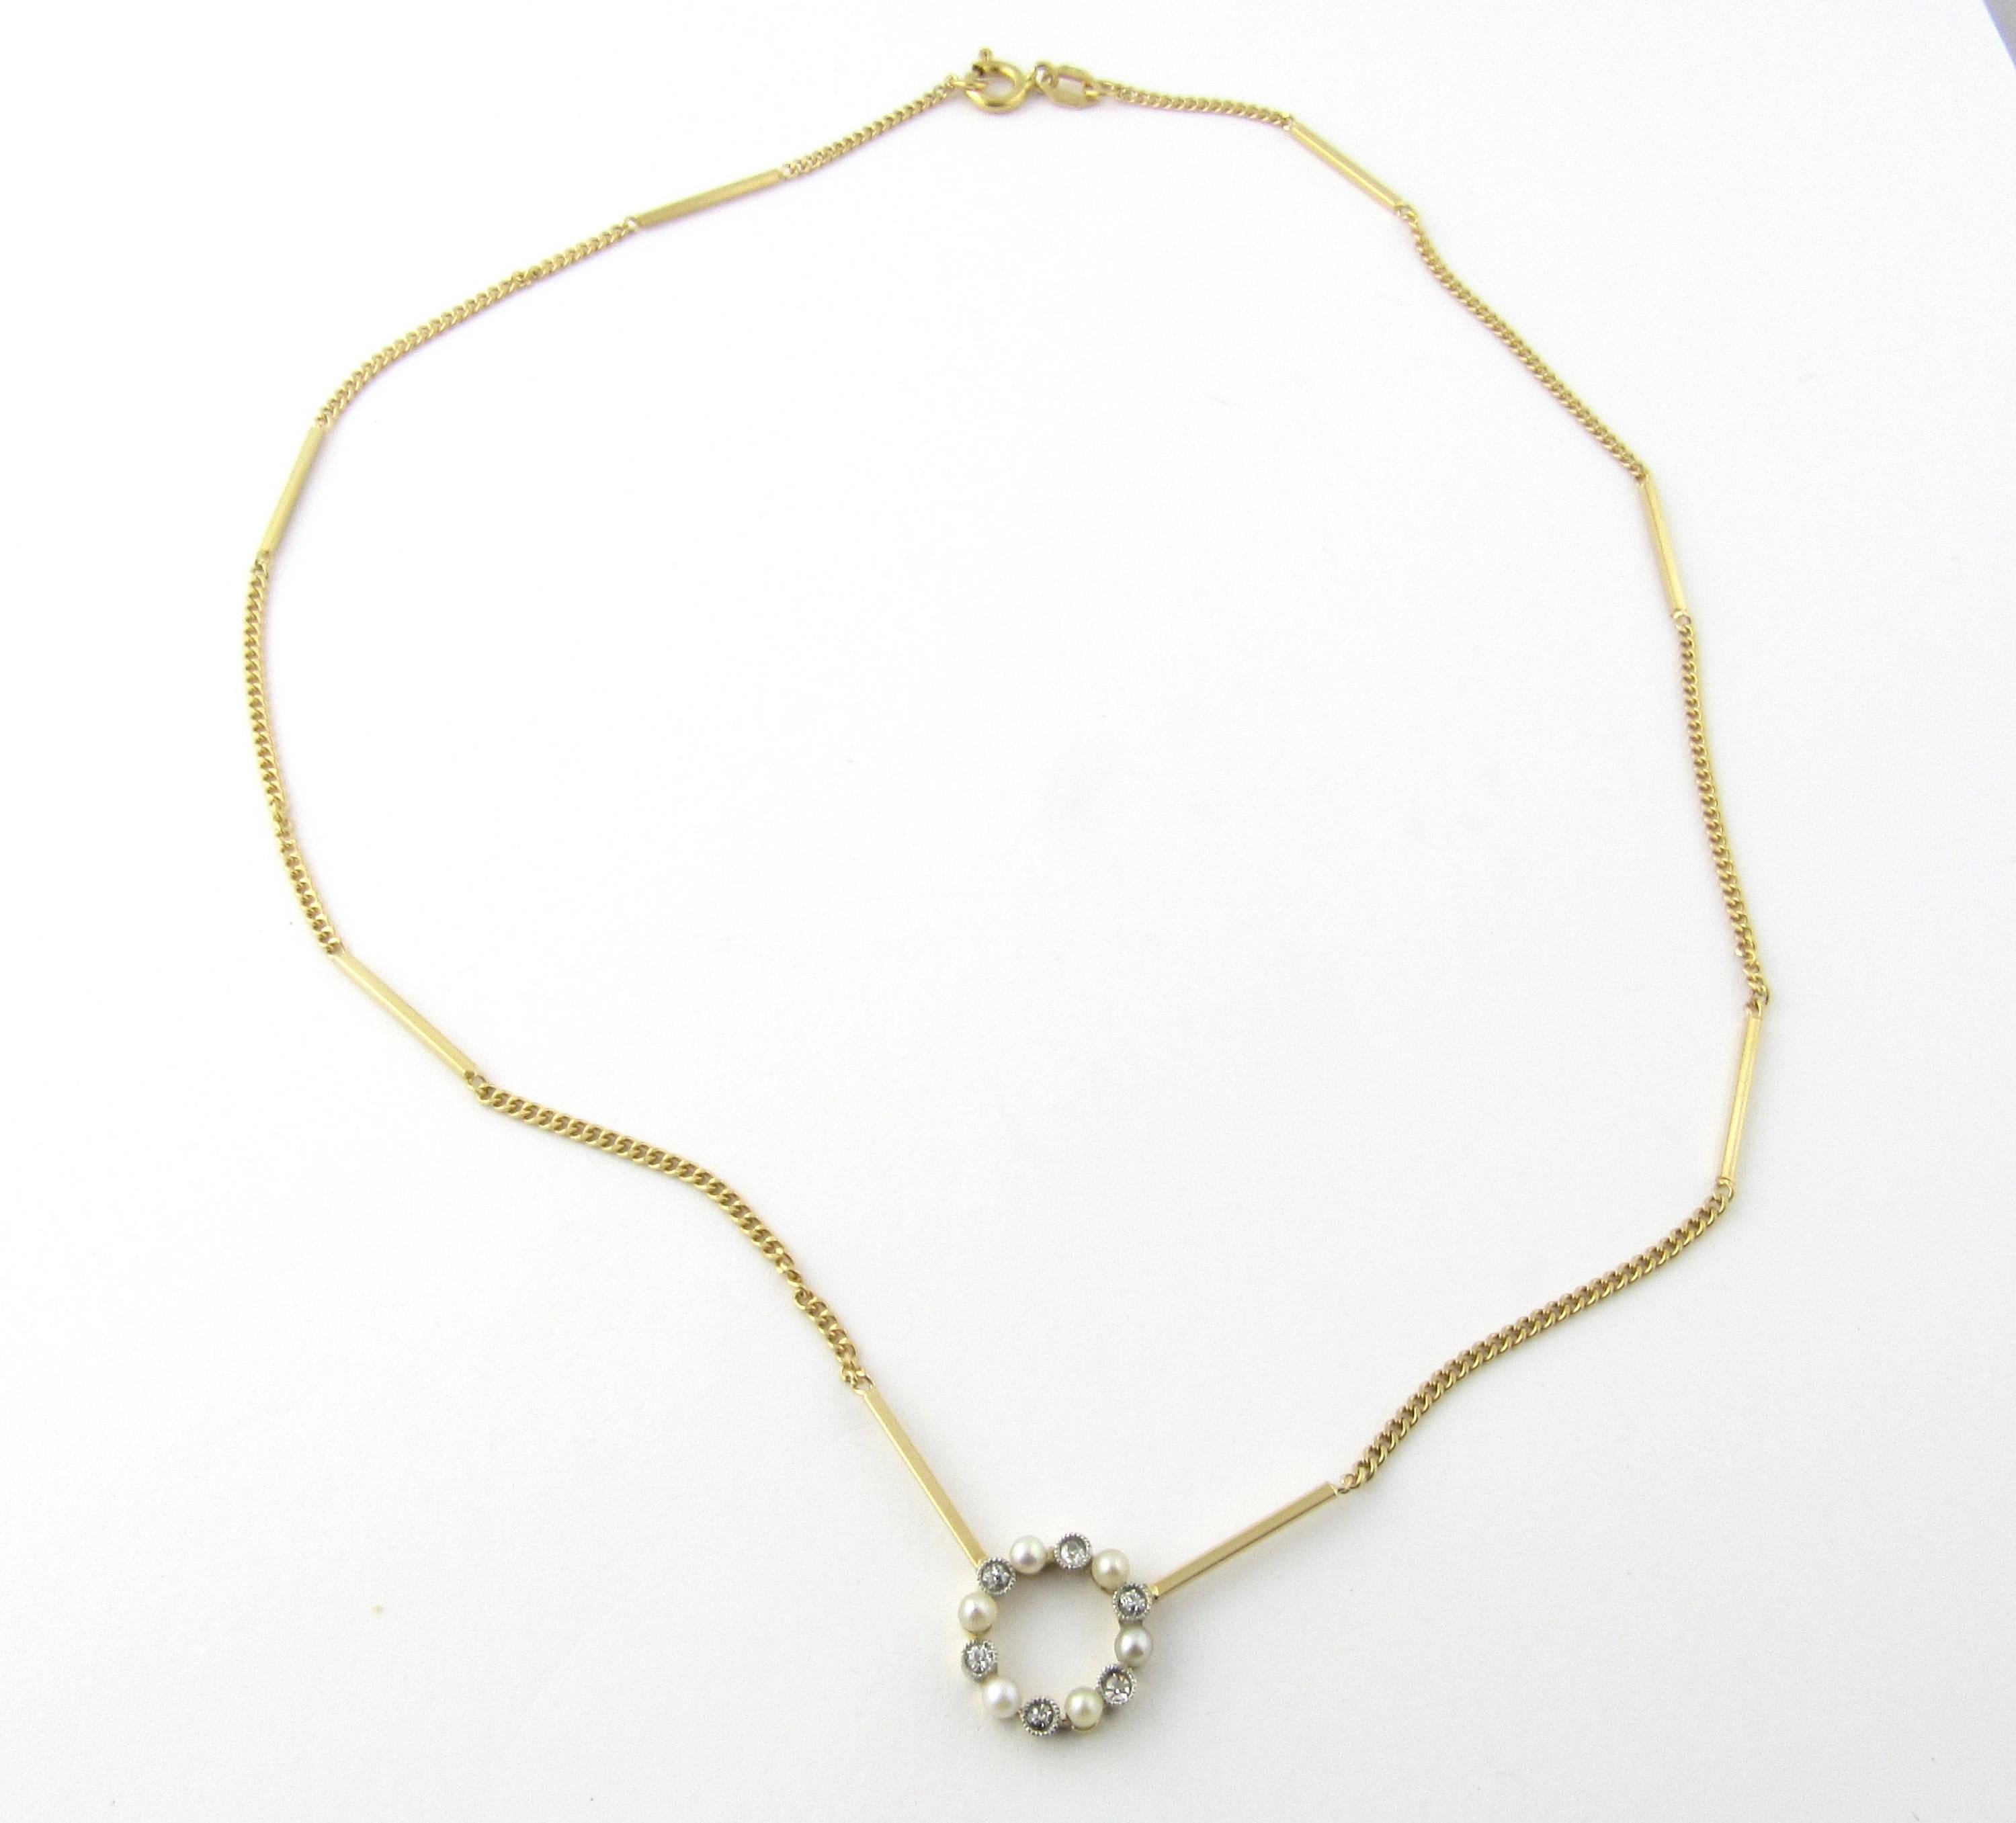 Vintage 18 Karat Yellow Gold Diamond and Pearl Necklace- 
This lovely necklace features six seed pearls and six single cut diamonds in a circle design on a beautiful Italian link chain. Center piece measures 11 mm. 
Size: 15.5 inches 
Weight: 3.0